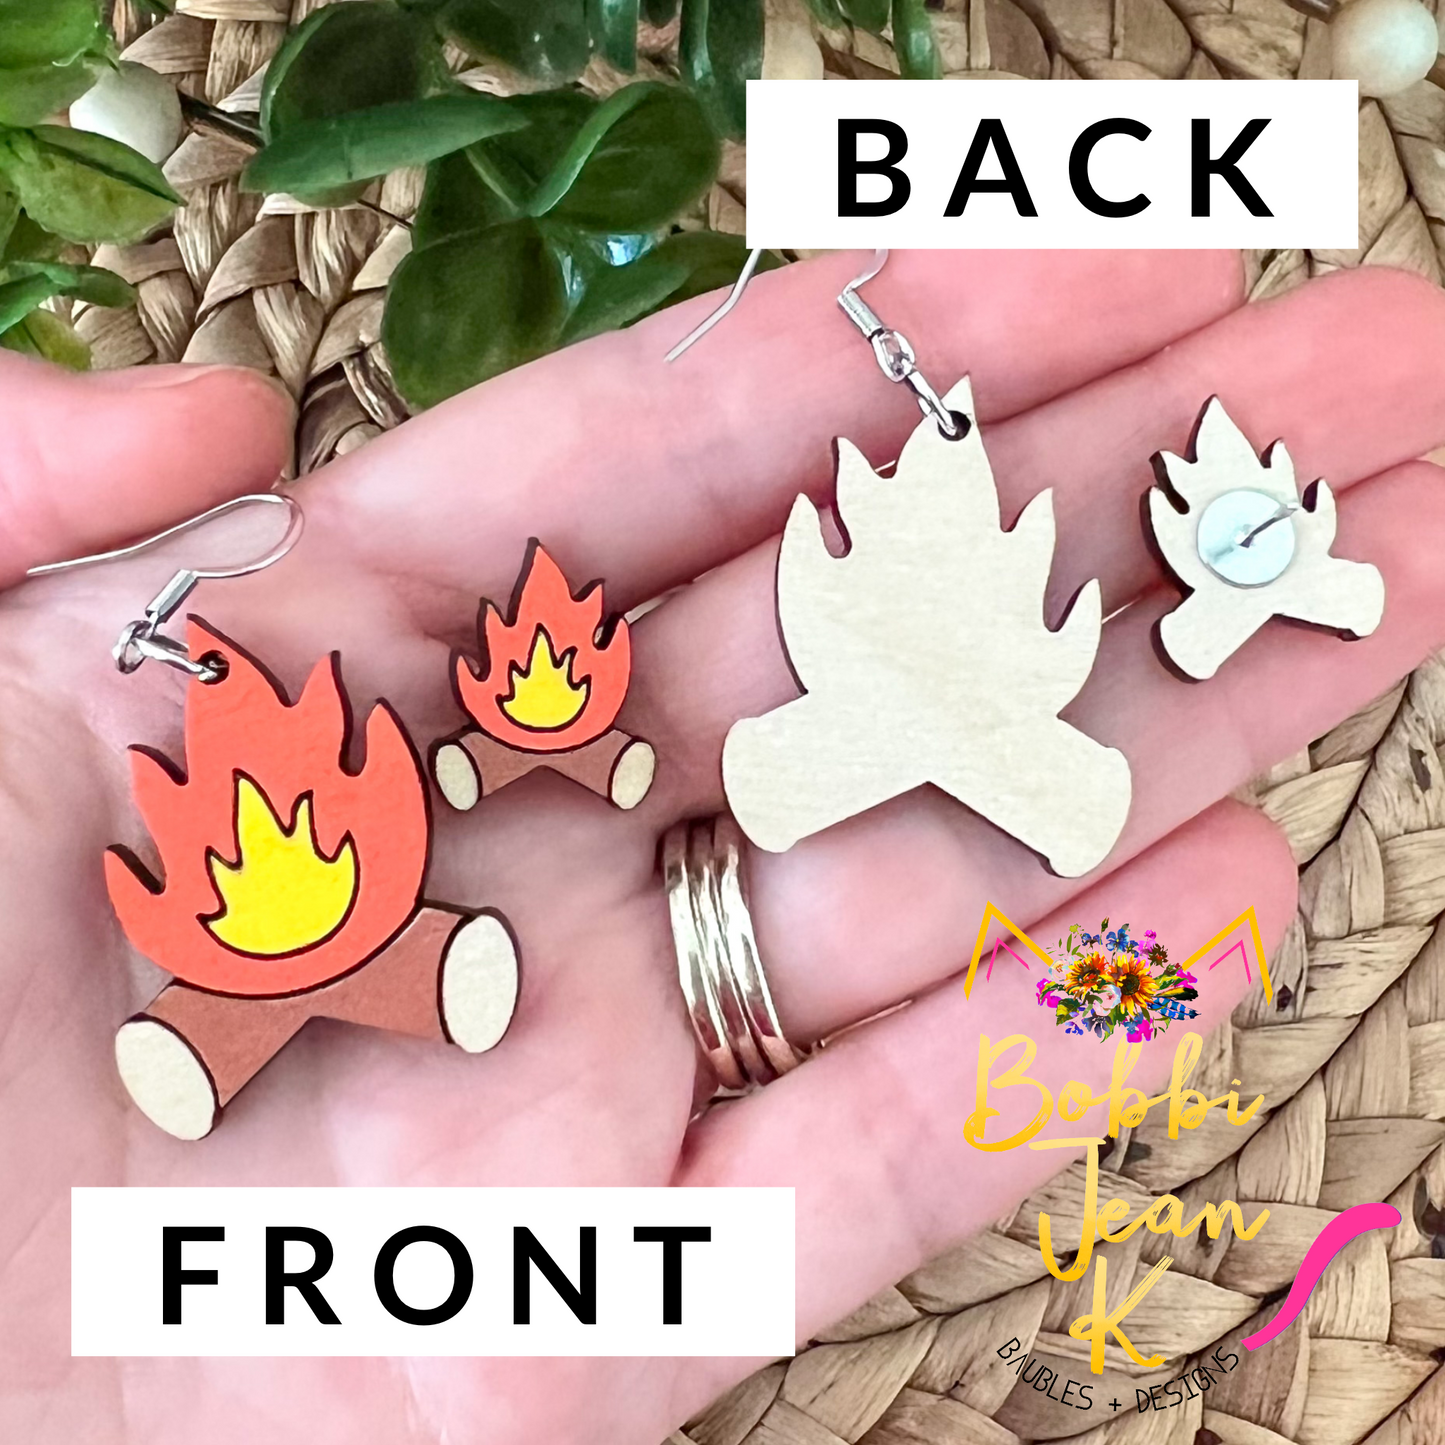 Bonfire/Campfire Hand Painted Wood Earrings: Choose From Dangle or Stud Style